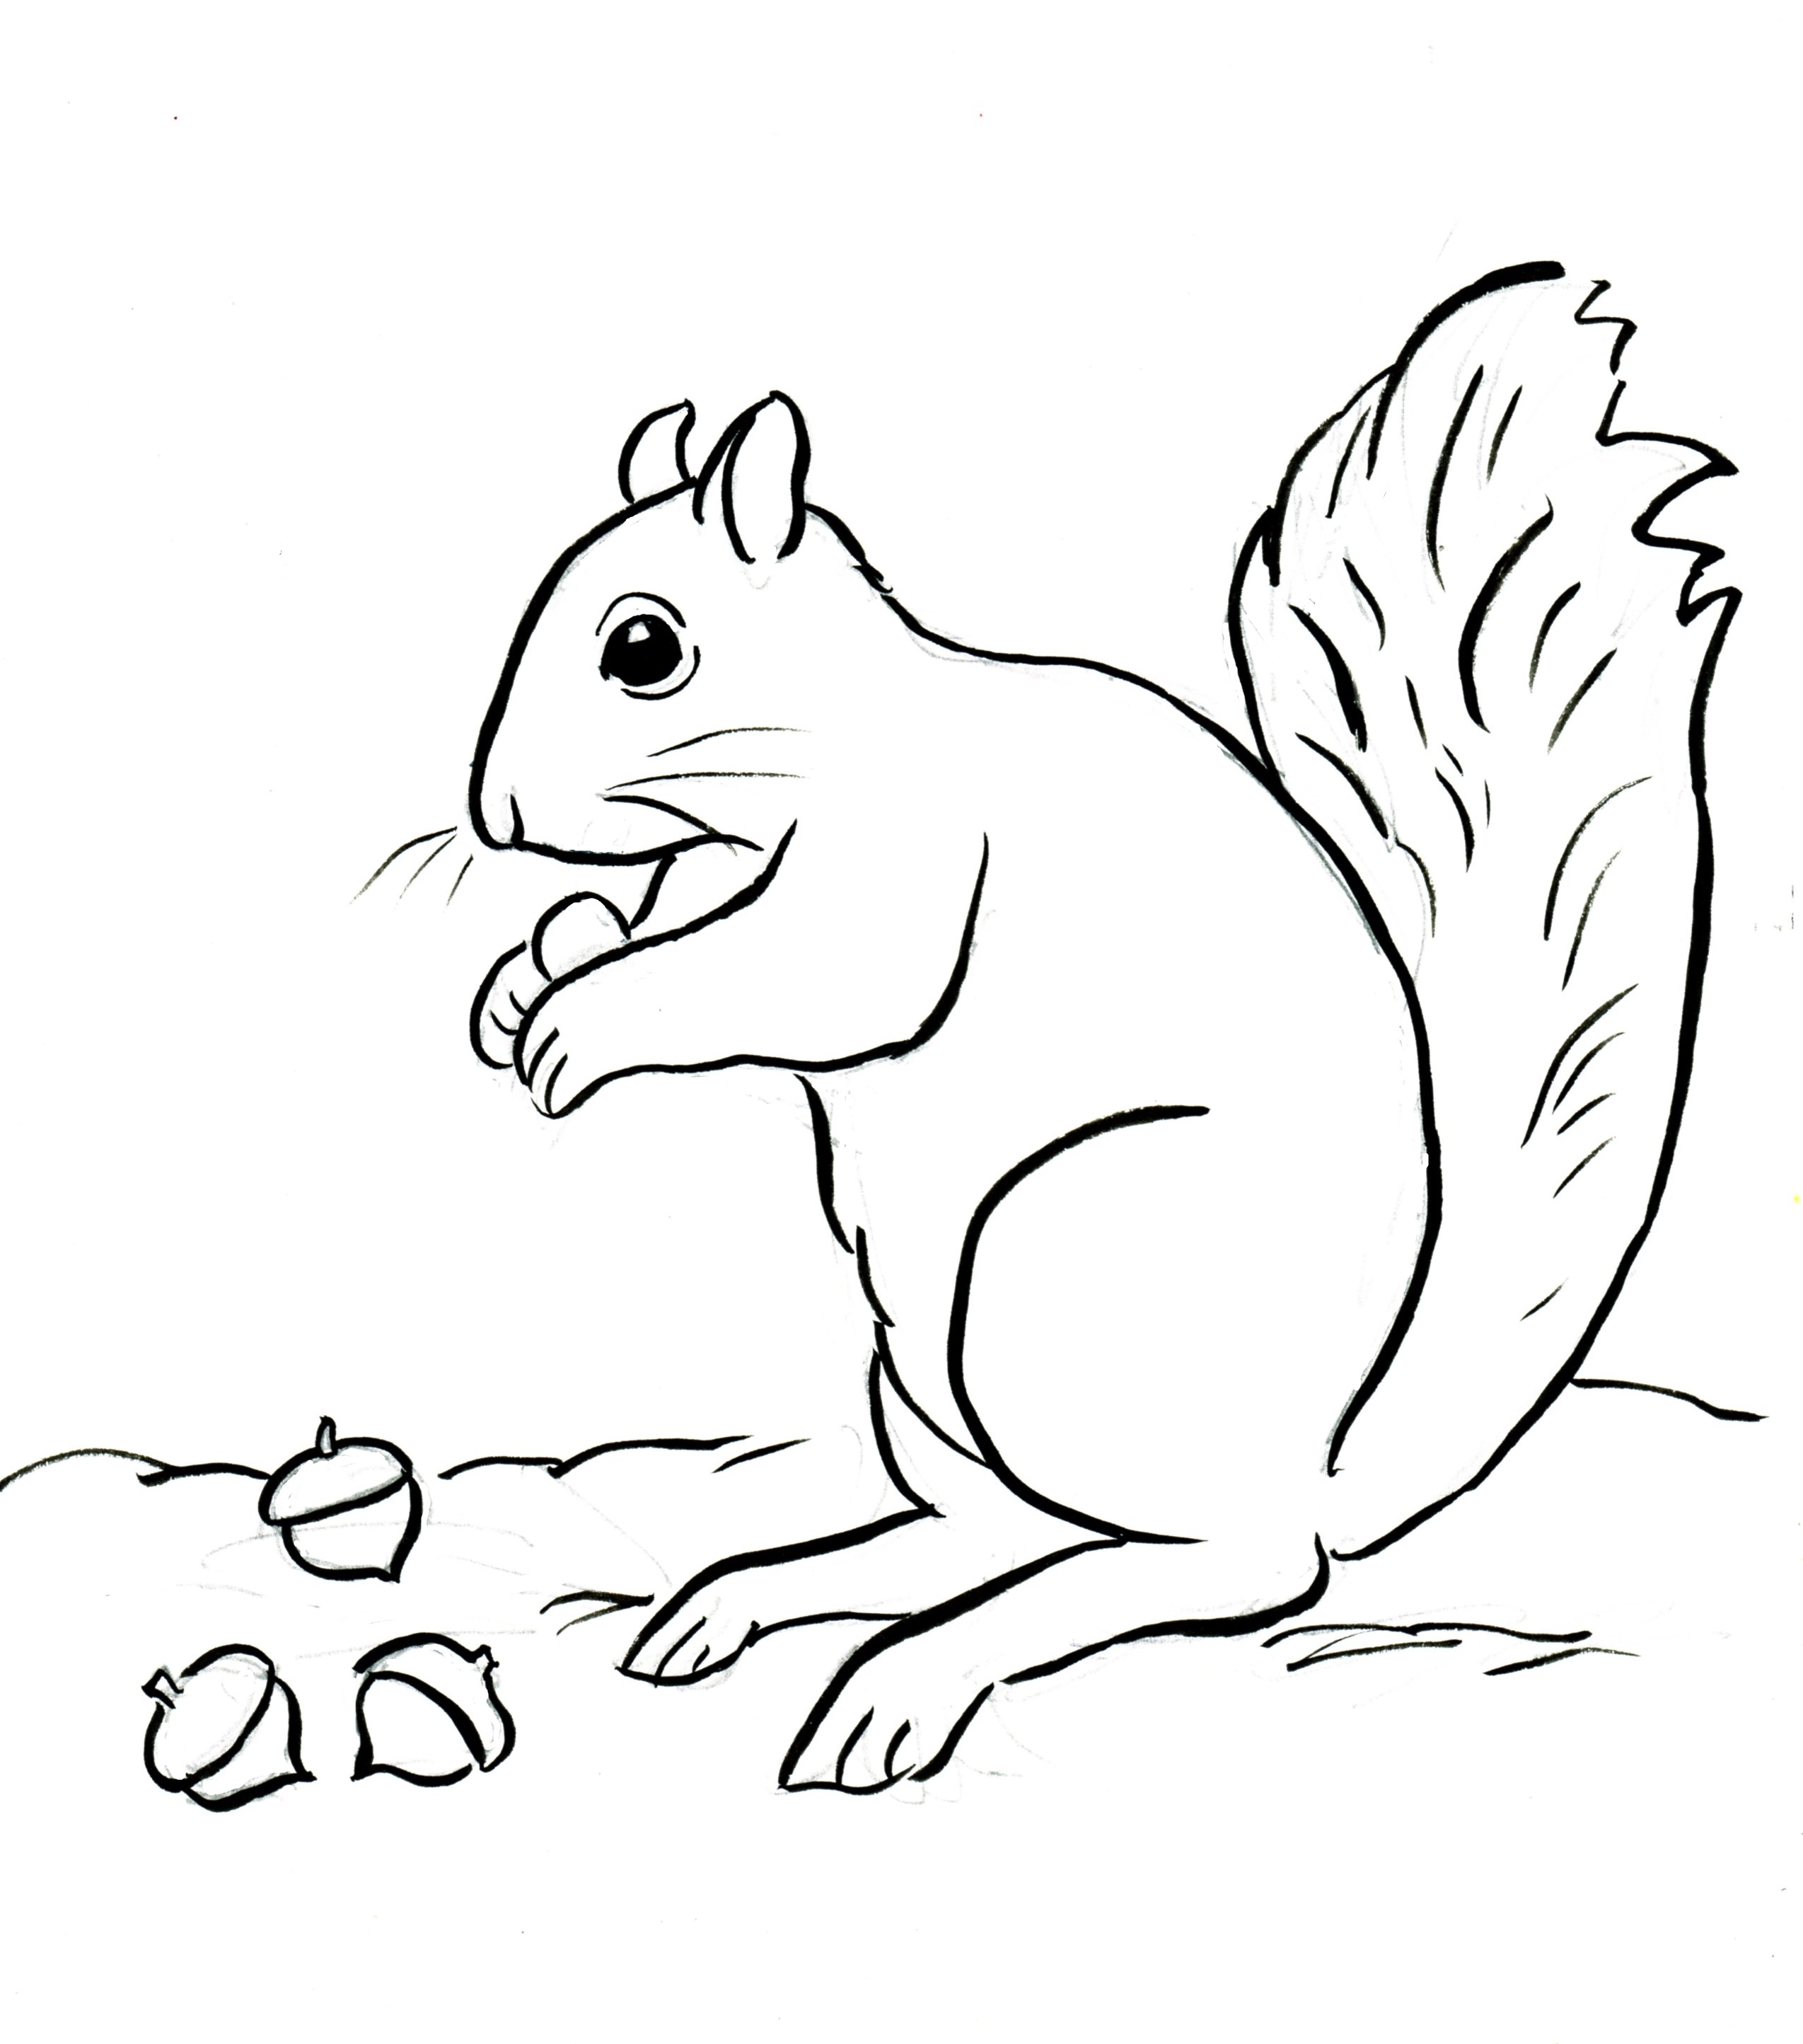 Squirrel Coloring Page Samantha Bell